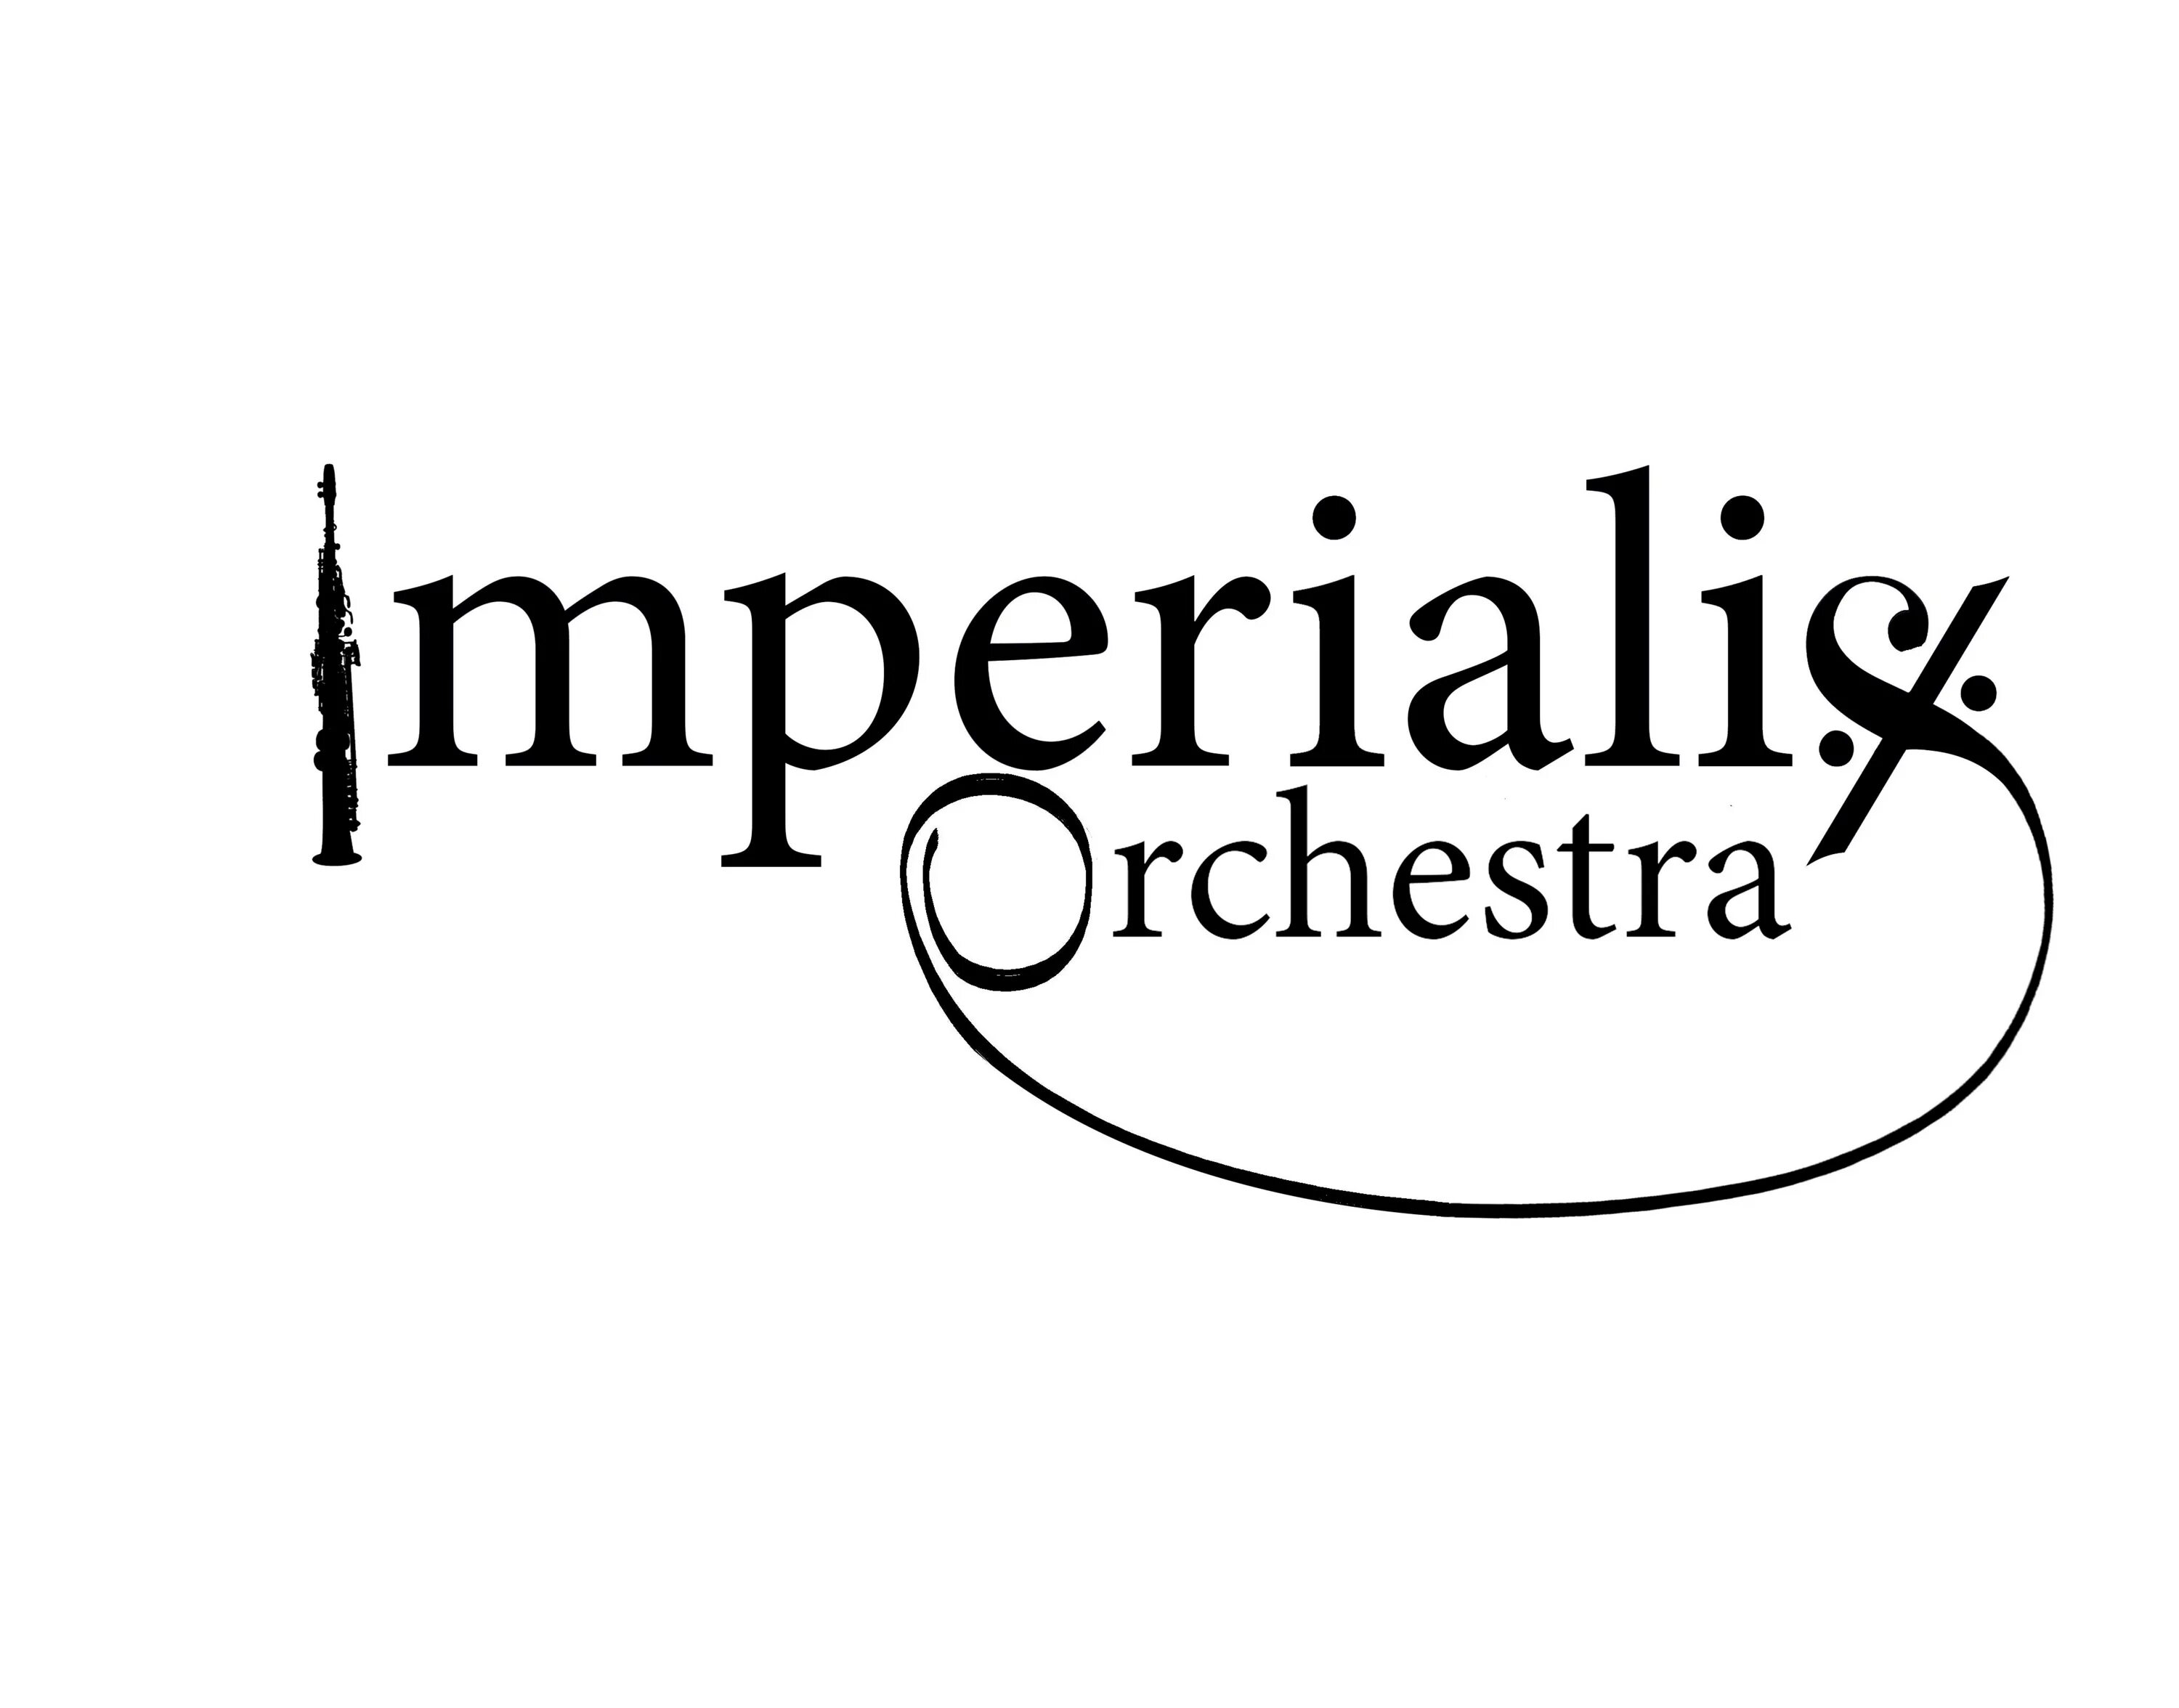 Imperialis Orchestra. Imperial Orchestra логотип. Imperialis Orchestra логотип в для иллюстратора. Imperial Orchestra на крыше.